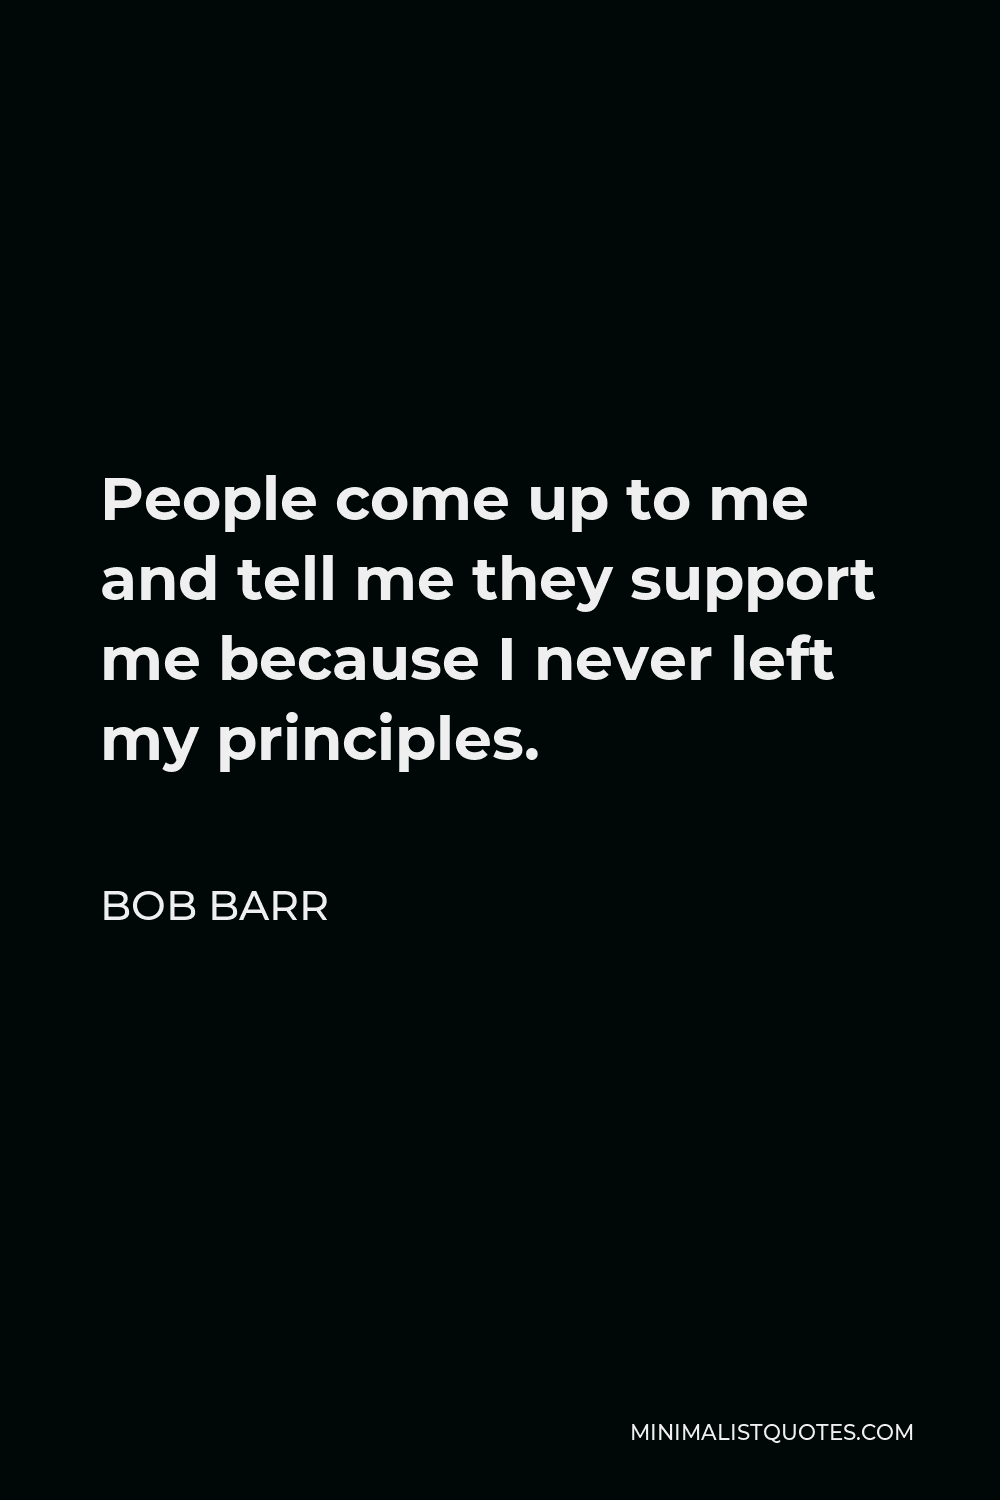 Bob Barr Quote - People come up to me and tell me they support me because I never left my principles.